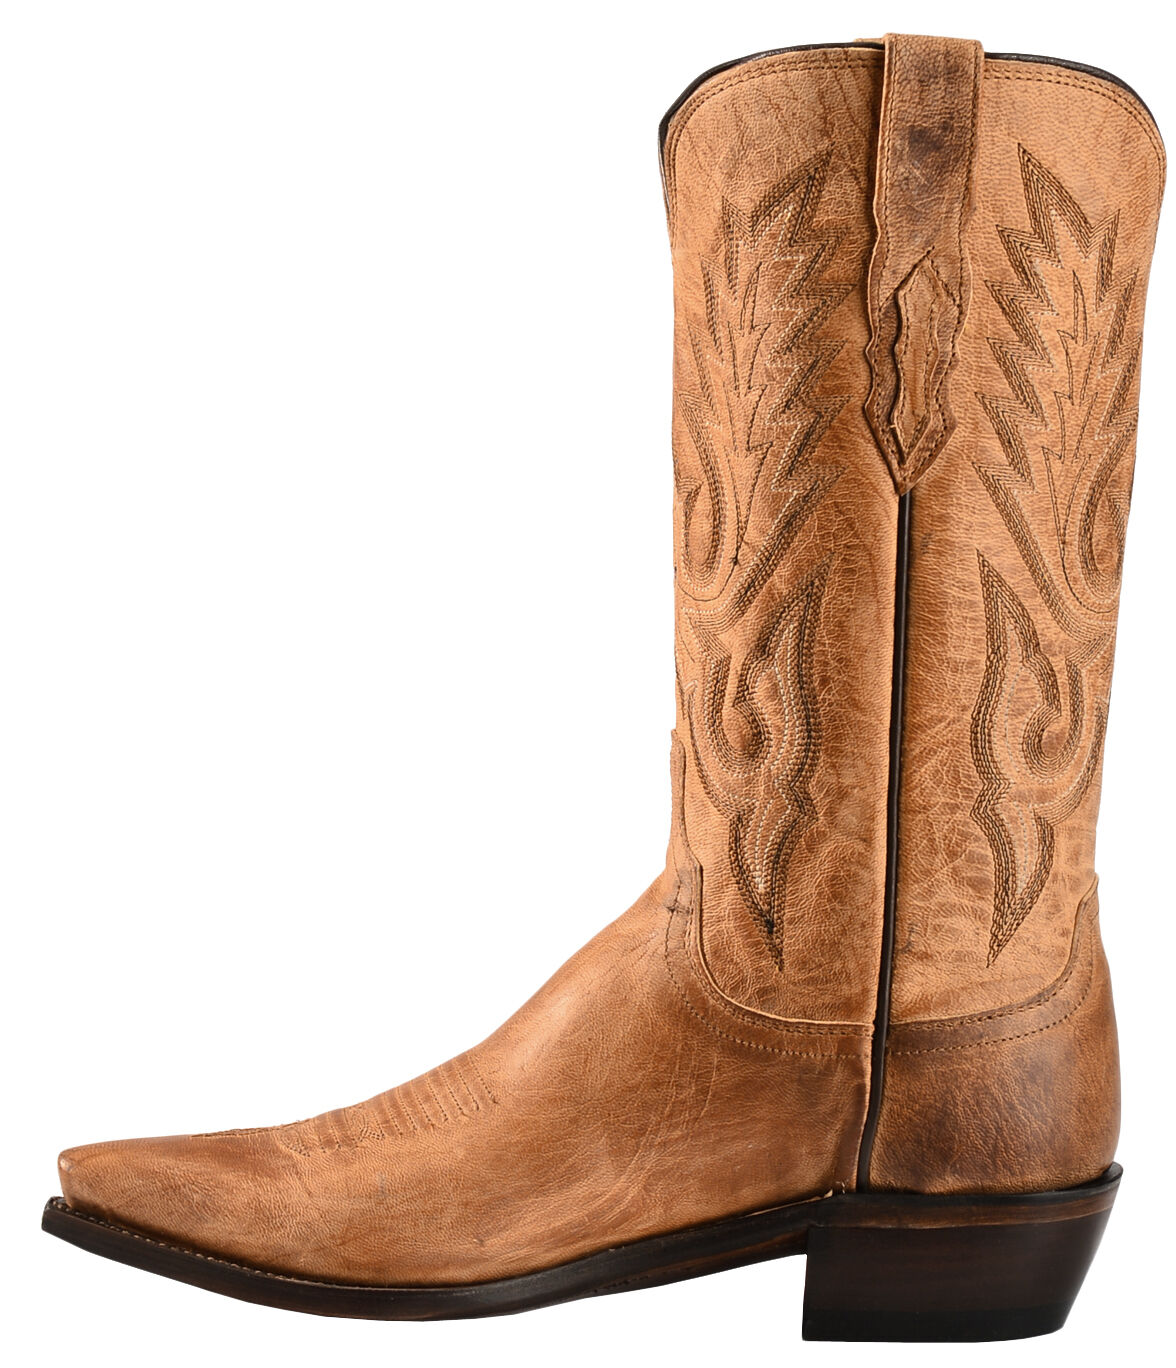 lucchese boots on sale